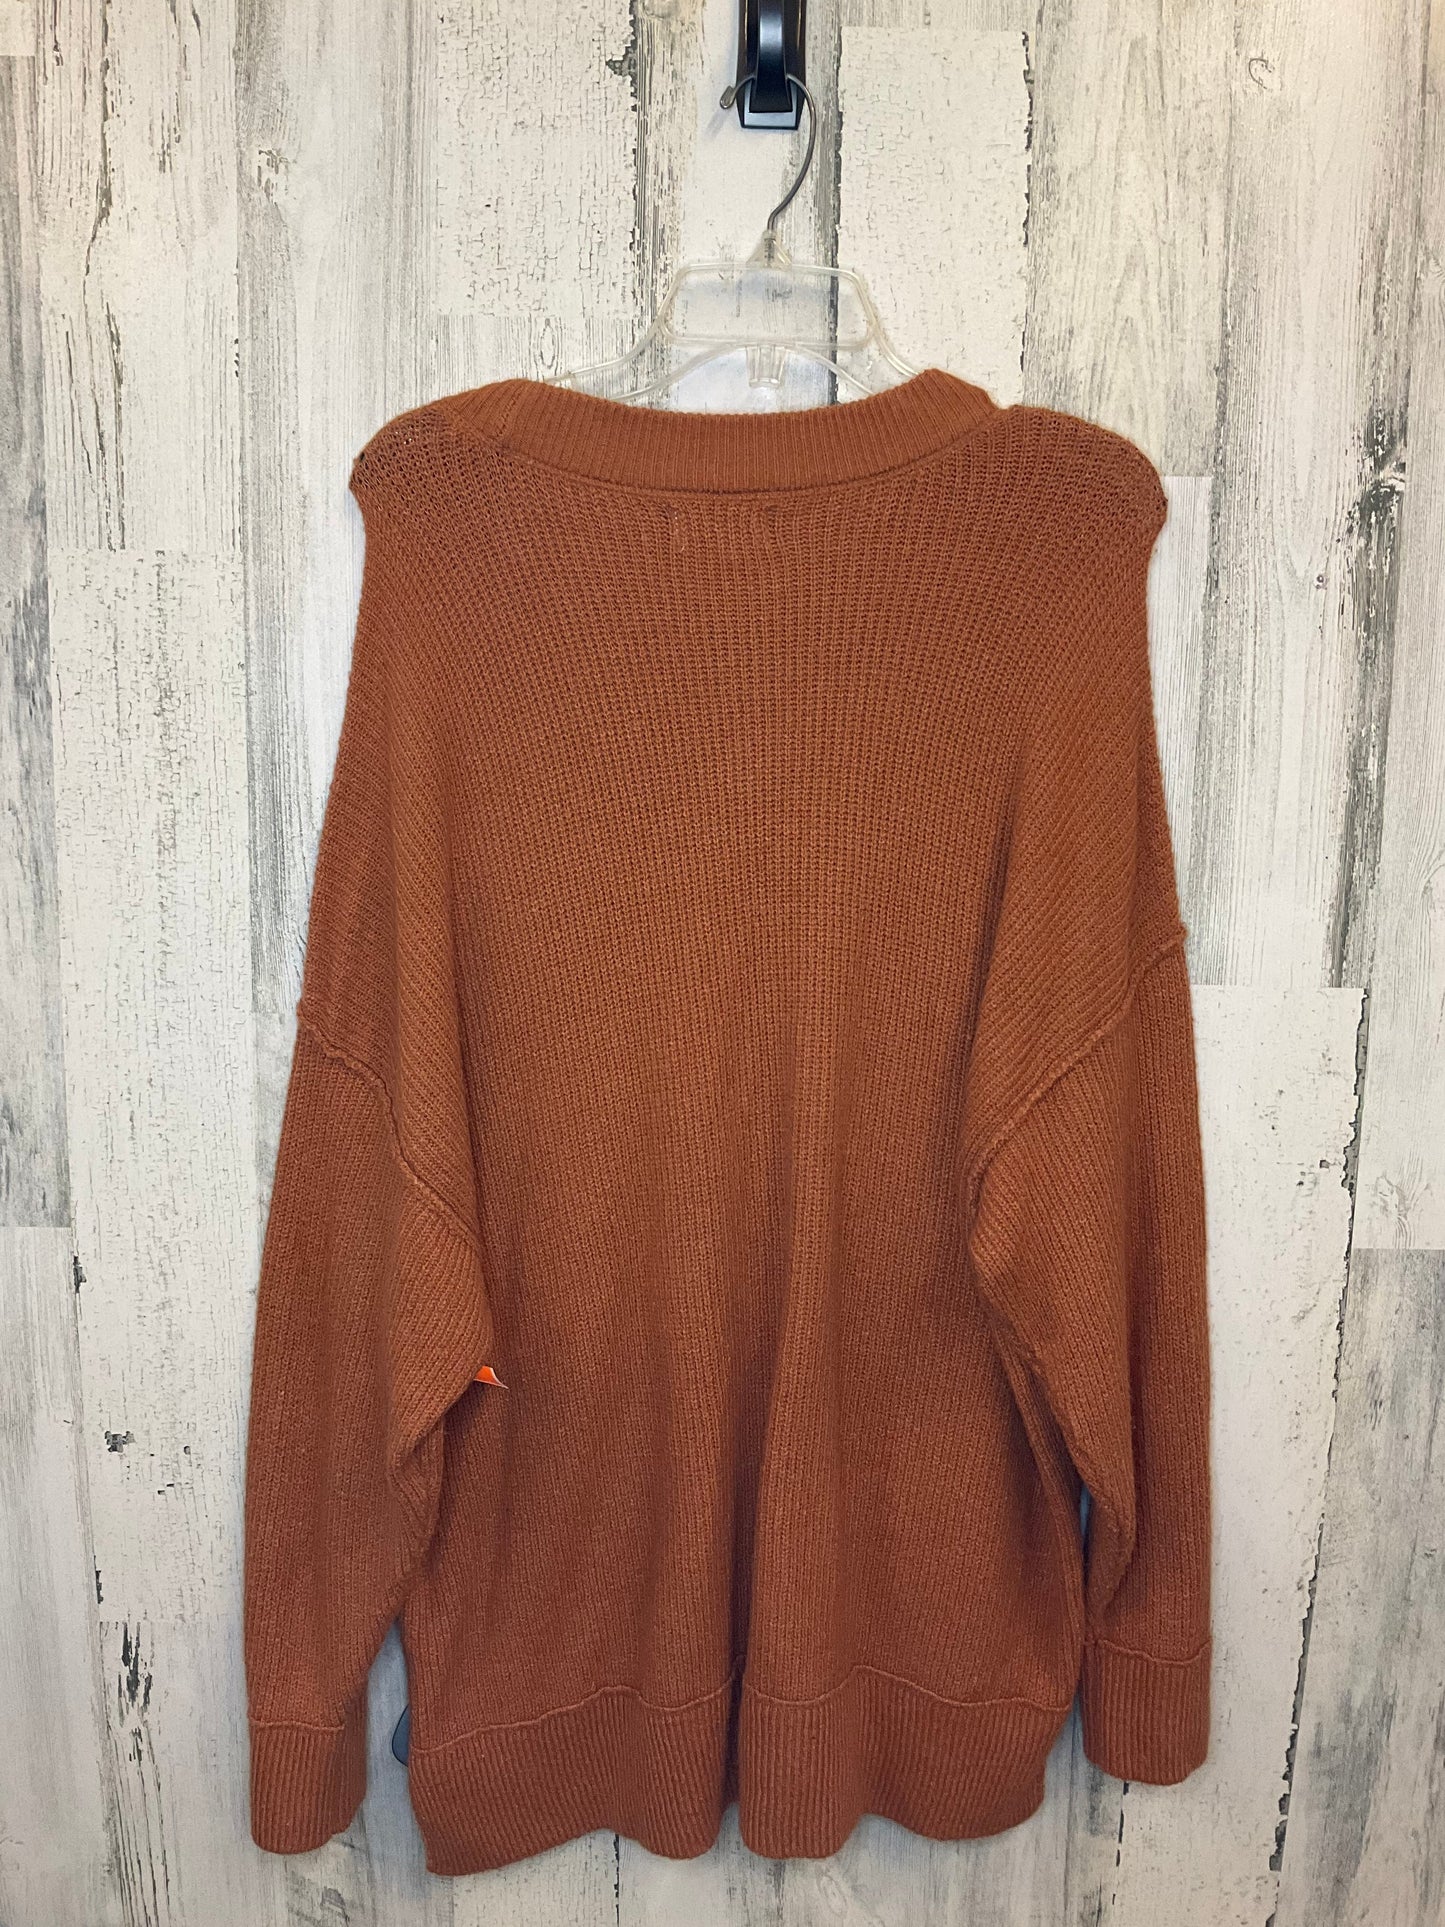 Sweater By Aerie  Size: M